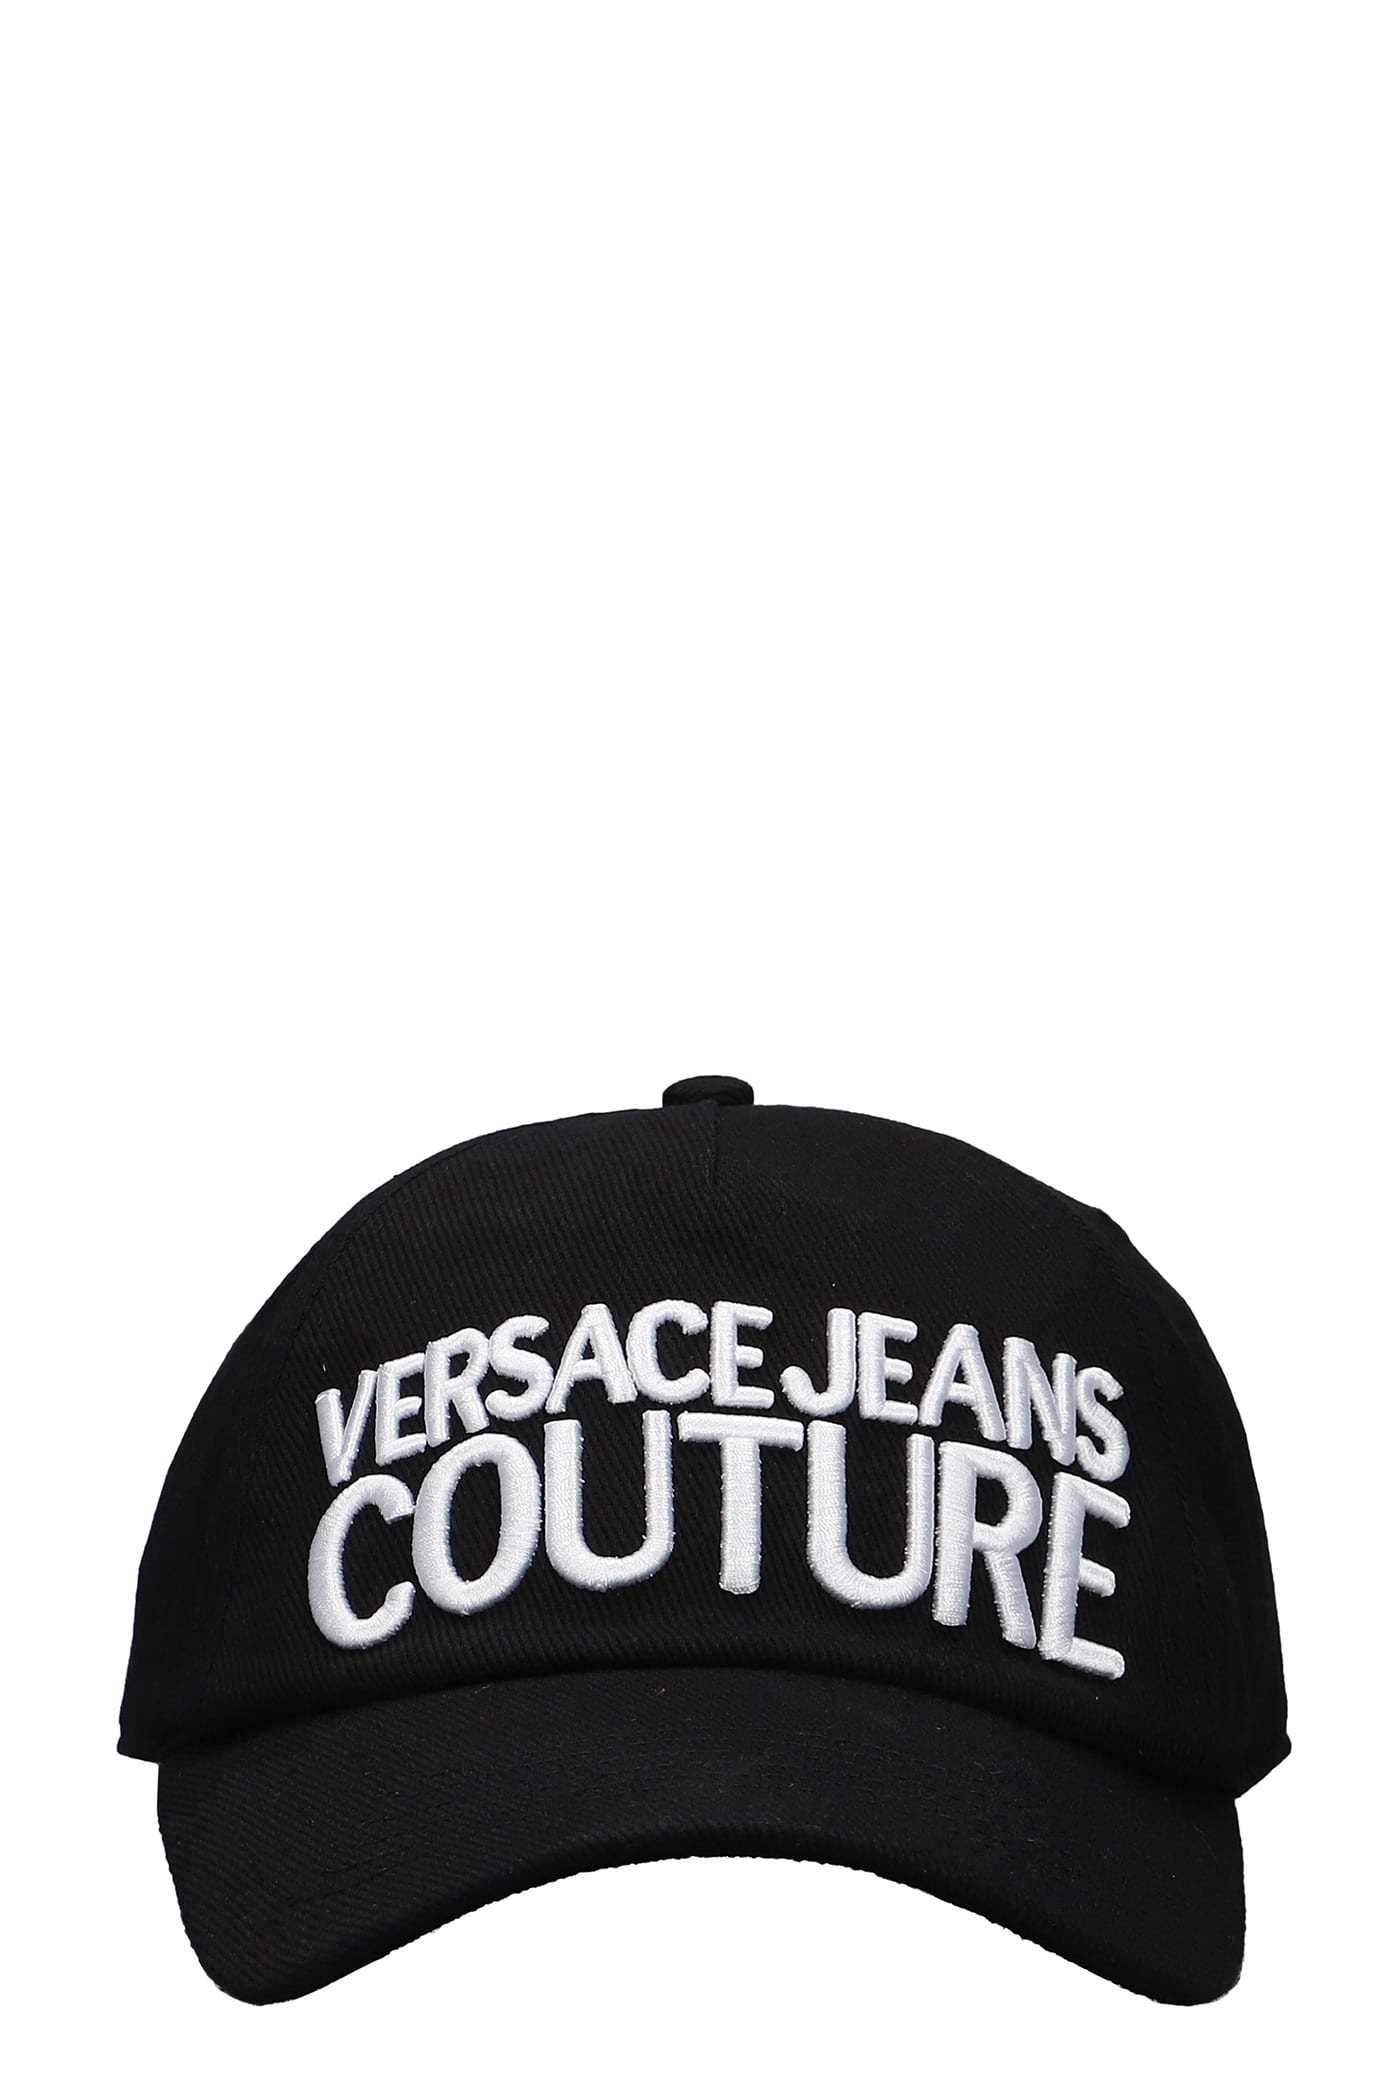 Versace Jeans Couture Hats In Black Canvas